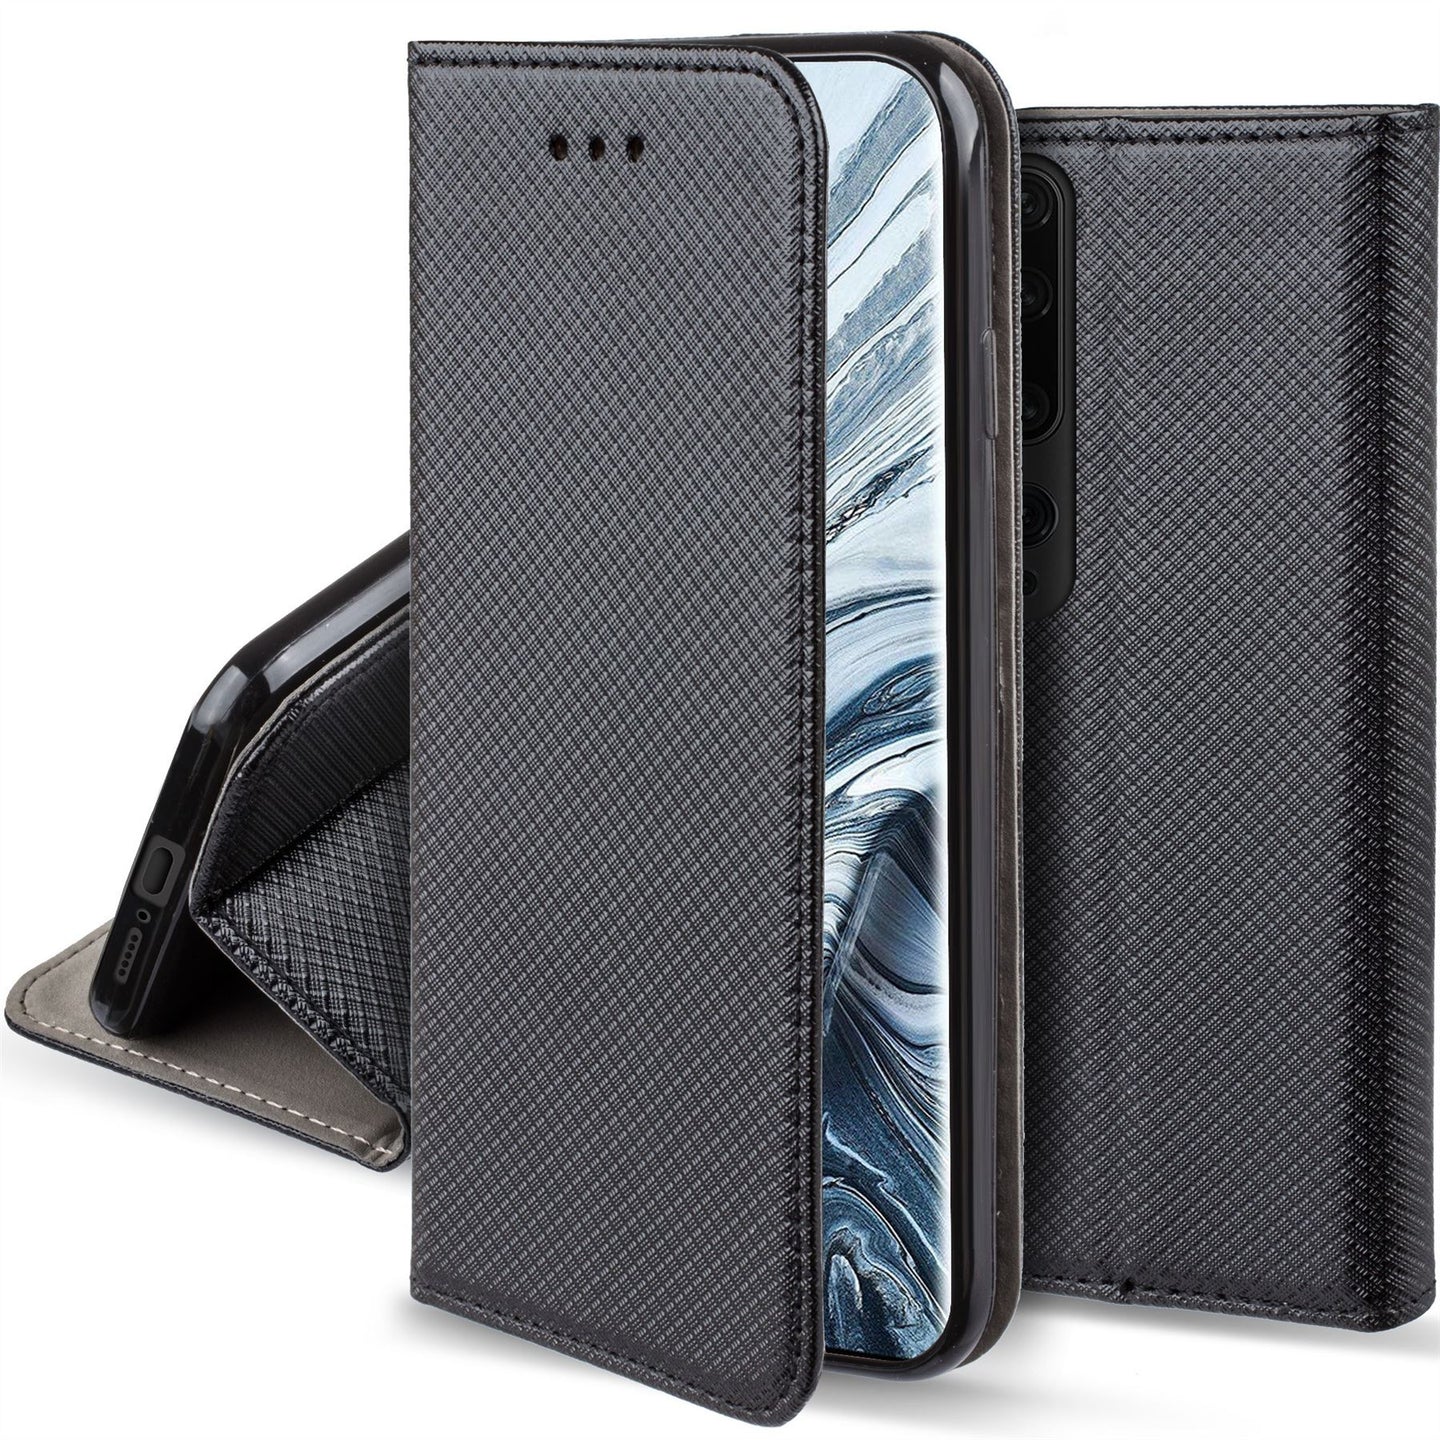 Moozy Case Flip Cover for Xiaomi Mi 10 and Xiaomi Mi 10 Pro, Black - Smart Magnetic Flip Case with Card Holder and Stand